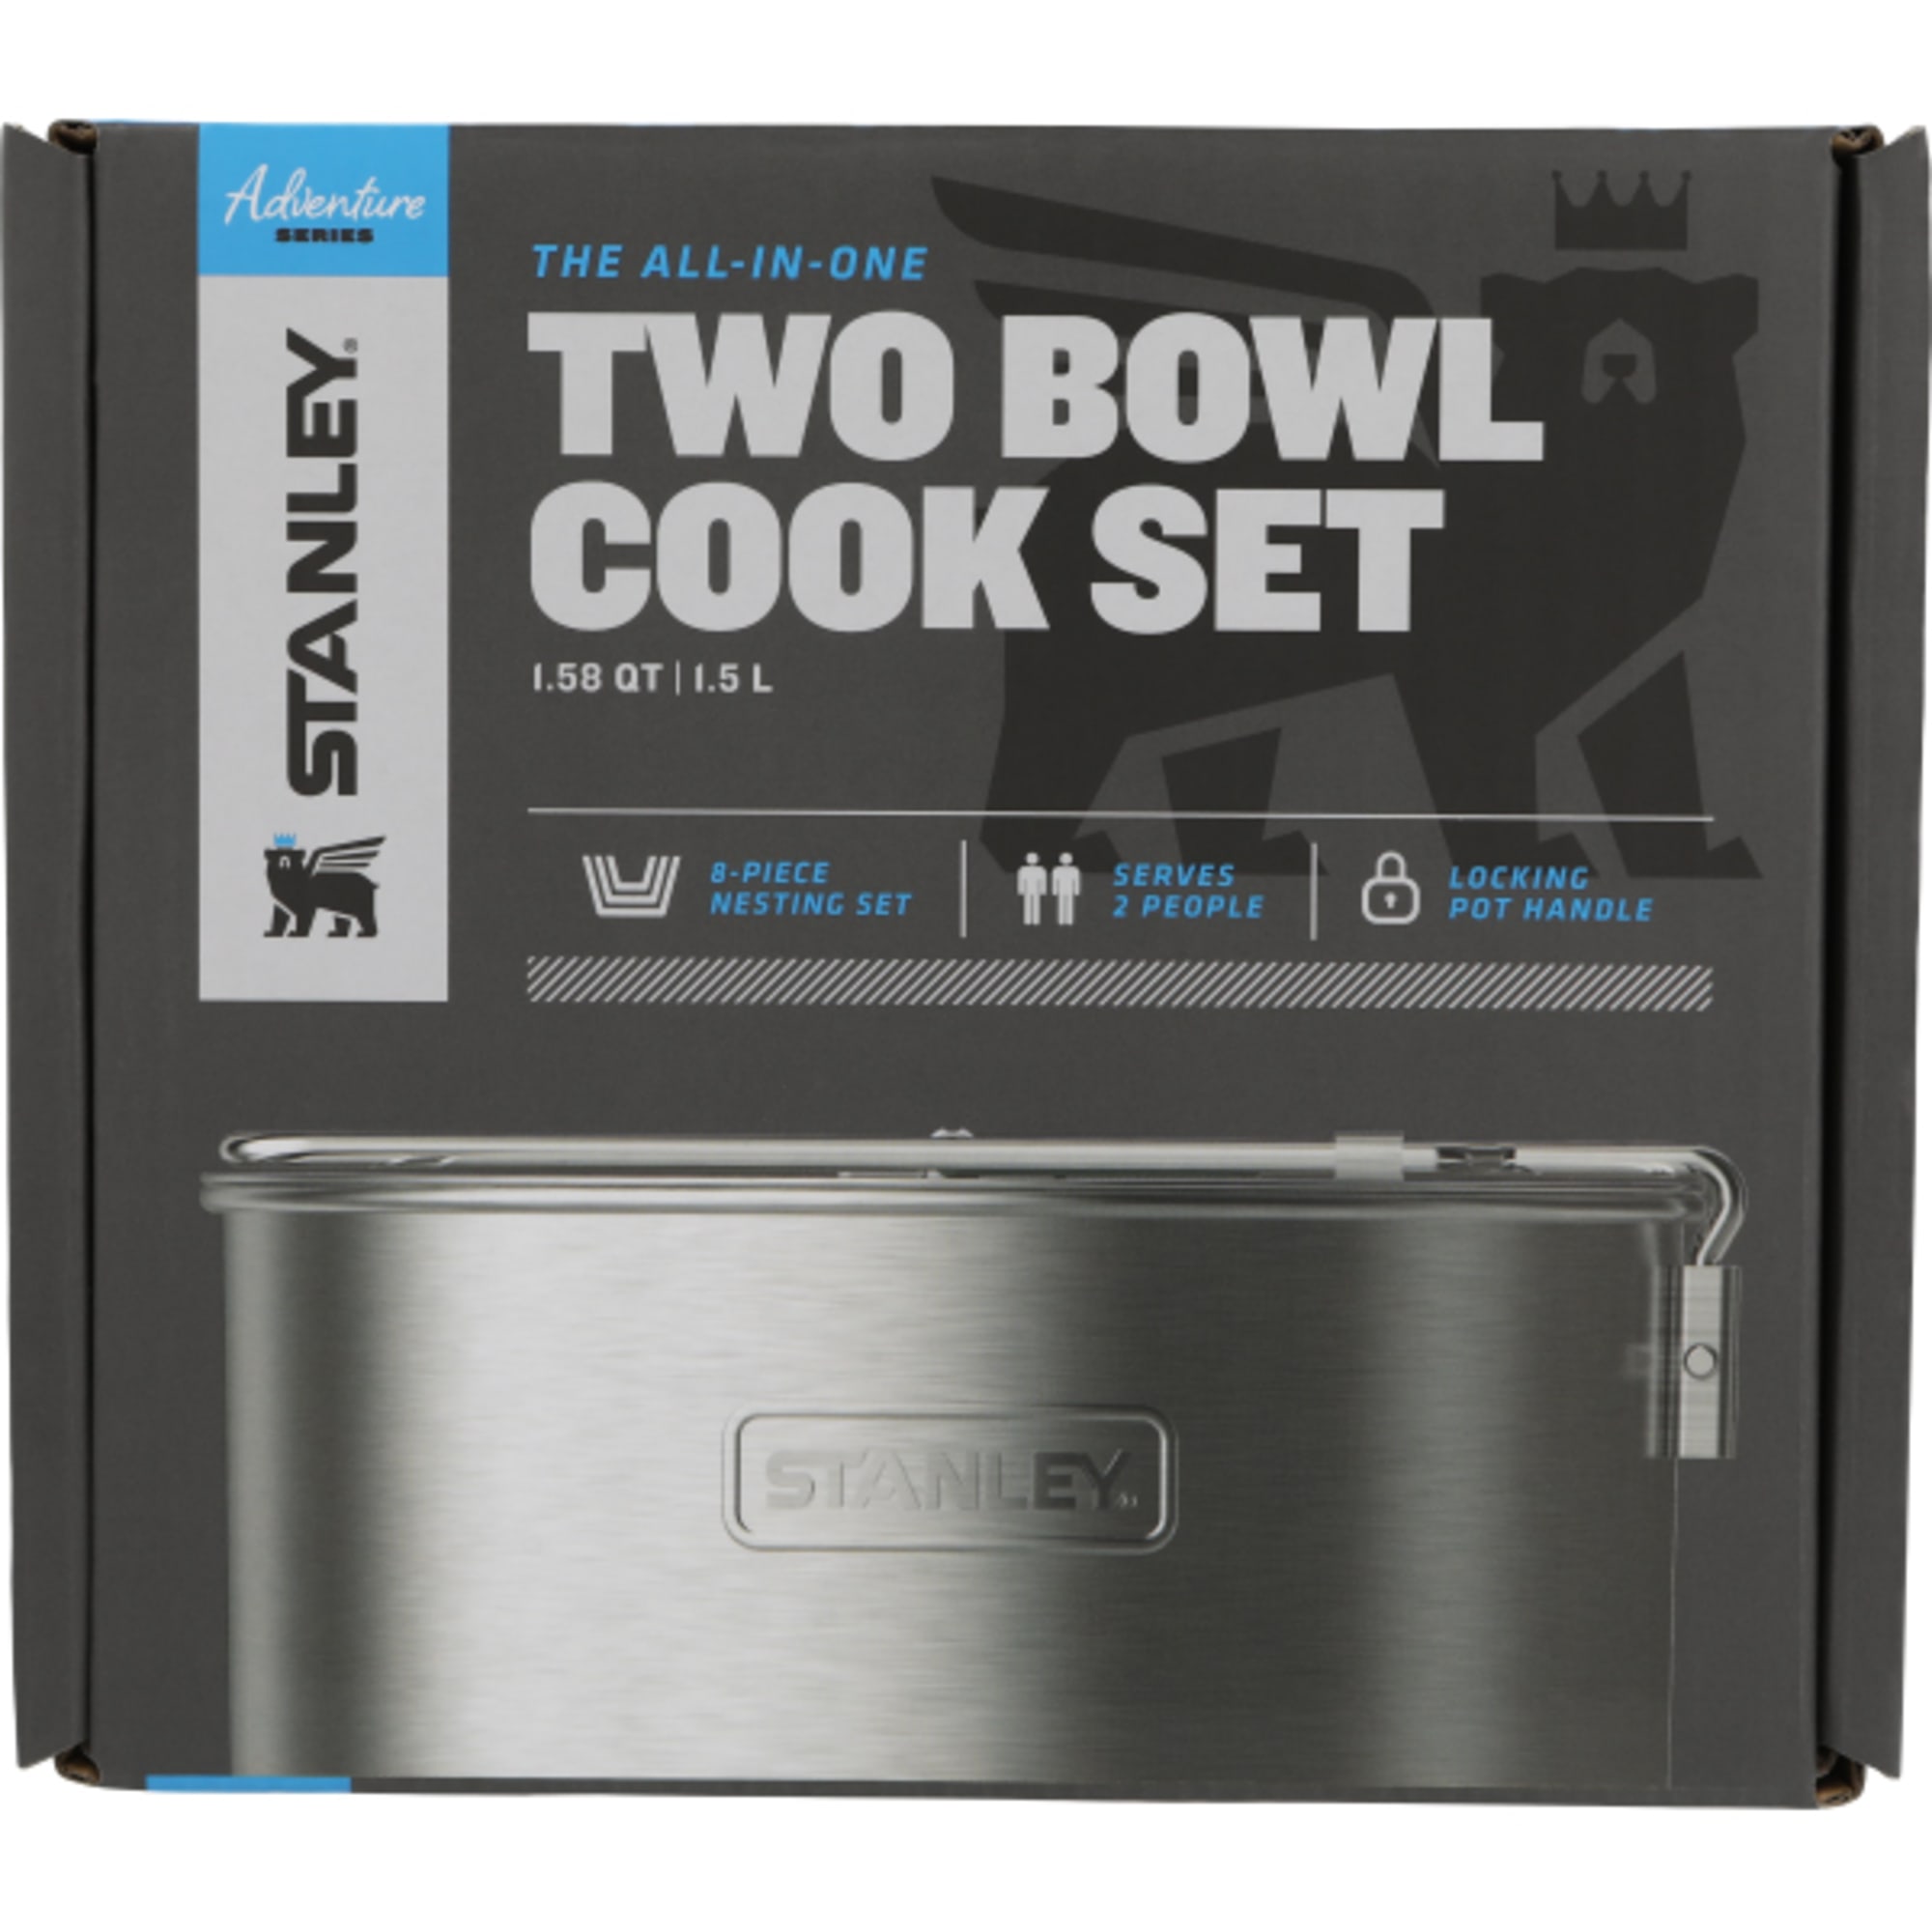 Stanley Adventure Stainless Steel All-in-one Two Bowl Cook Set : Target